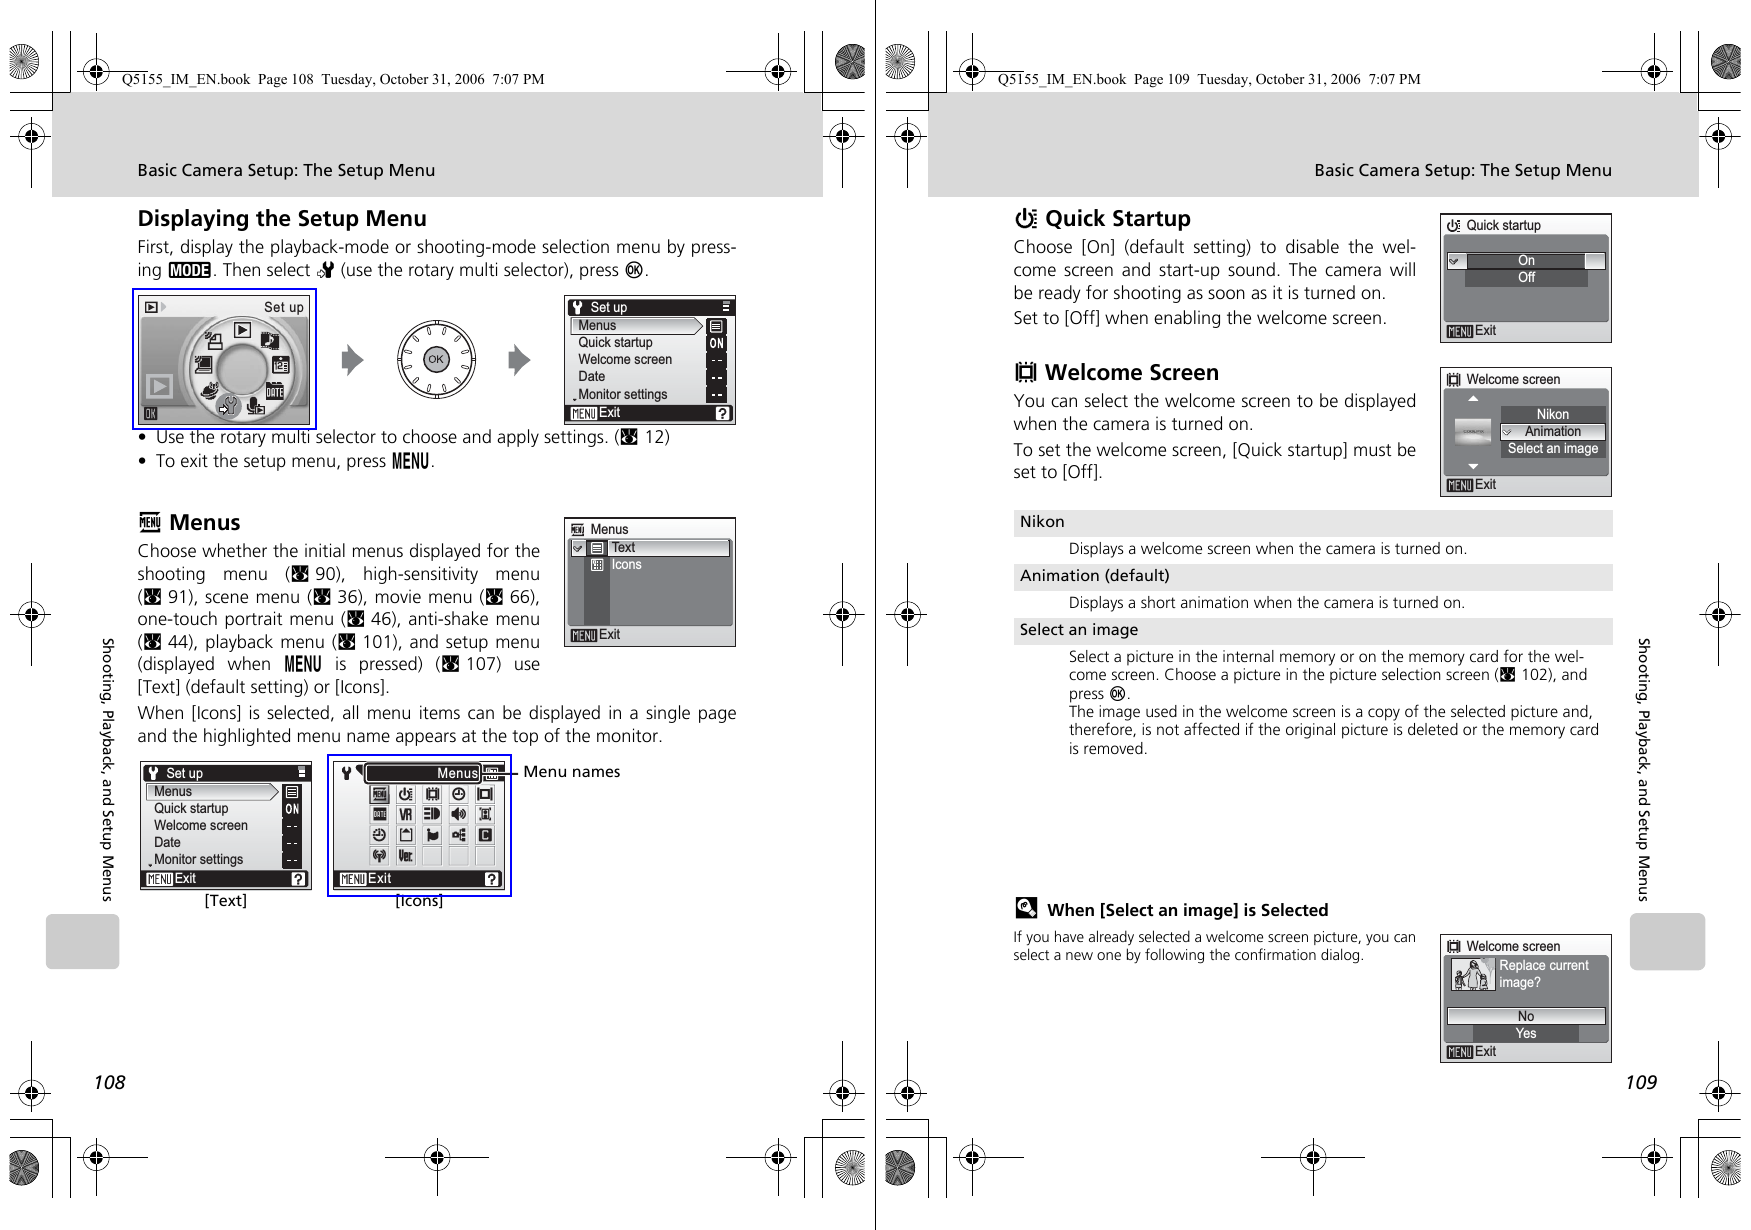 108Basic Camera Setup: The Setup MenuShooting, Playback, and Setup MenusDisplaying the Setup MenuFirst, display the playback-mode or shooting-mode selection menu by press-ing C. Then select Z (use the rotary multi selector), press d.• Use the rotary multi selector to choose and apply settings. (c12)• To exit the setup menu, press m.R MenusChoose whether the initial menus displayed for theshooting menu (c90), high-sensitivity menu(c91), scene menu (c36), movie menu (c66),one-touch portrait menu (c46), anti-shake menu(c44), playback menu (c101), and setup menu(displayed when m is pressed) (c107) use[Text] (default setting) or [Icons].When [Icons] is selected, all menu items can be displayed in a single pageand the highlighted menu name appears at the top of the monitor.Set upMenusQuick startupWelcome screenDateMonitor settingsExitSet upMenusExitTex tIconsRHVWZfbuhIiO kjnBnExitMenusSet upMenusQuick startupWelcome screenDateMonitor settingsExit[Text] [Icons]Menu namesQ5155_IM_EN.book  Page 108  Tuesday, October 31, 2006  7:07 PM109Basic Camera Setup: The Setup MenuShooting, Playback, and Setup MenusH Quick StartupChoose [On] (default setting) to disable the wel-come screen and start-up sound. The camera willbe ready for shooting as soon as it is turned on.Set to [Off] when enabling the welcome screen.V Welcome ScreenYou can select the welcome screen to be displayedwhen the camera is turned on.To set the welcome screen, [Quick startup] must beset to [Off].lWhen [Select an image] is SelectedIf you have already selected a welcome screen picture, you canselect a new one by following the confirmation dialog.NikonDisplays a welcome screen when the camera is turned on.Animation (default)Displays a short animation when the camera is turned on.Select an imageSelect a picture in the internal memory or on the memory card for the wel-come screen. Choose a picture in the picture selection screen (c102), and press d. The image used in the welcome screen is a copy of the selected picture and, therefore, is not affected if the original picture is deleted or the memory card is removed.Quick startupOnOffExitWelcome screenExitNikonAnimationSelect an imageWelcome screenExitYesNoReplace currentimage?Q5155_IM_EN.book  Page 109  Tuesday, October 31, 2006  7:07 PM